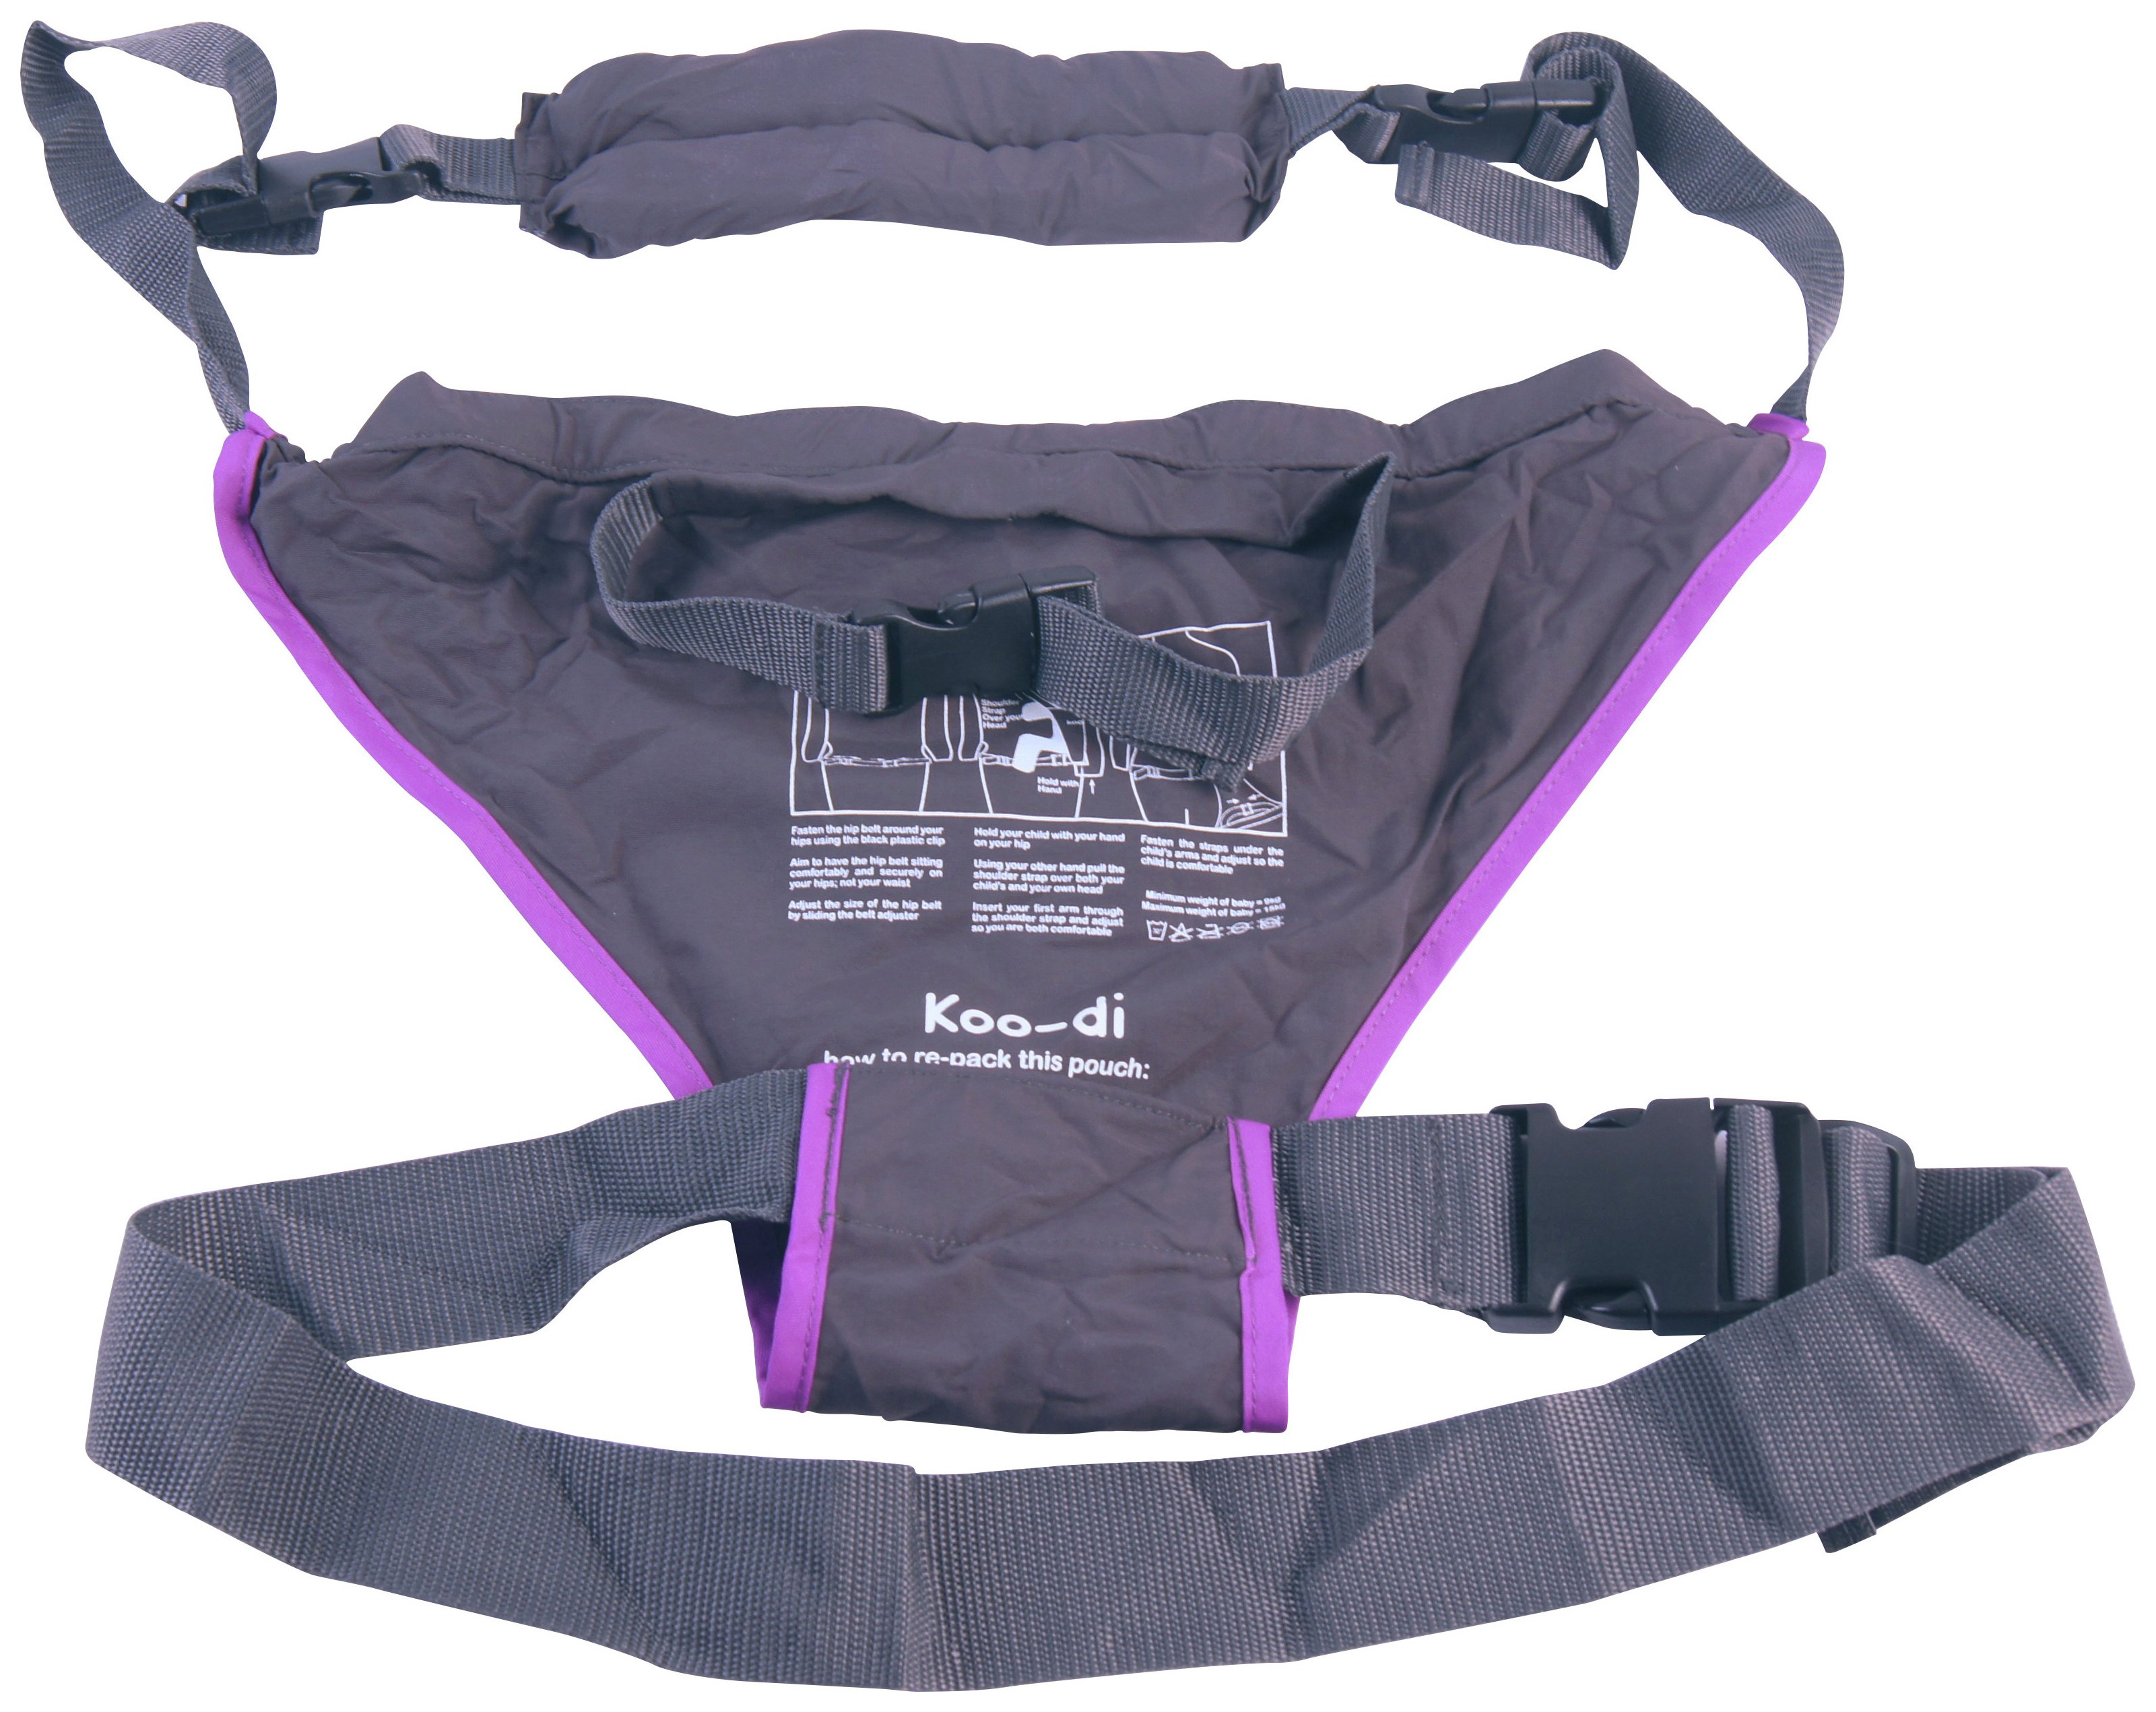 Koo-di Pack-It Hip Carrier Review